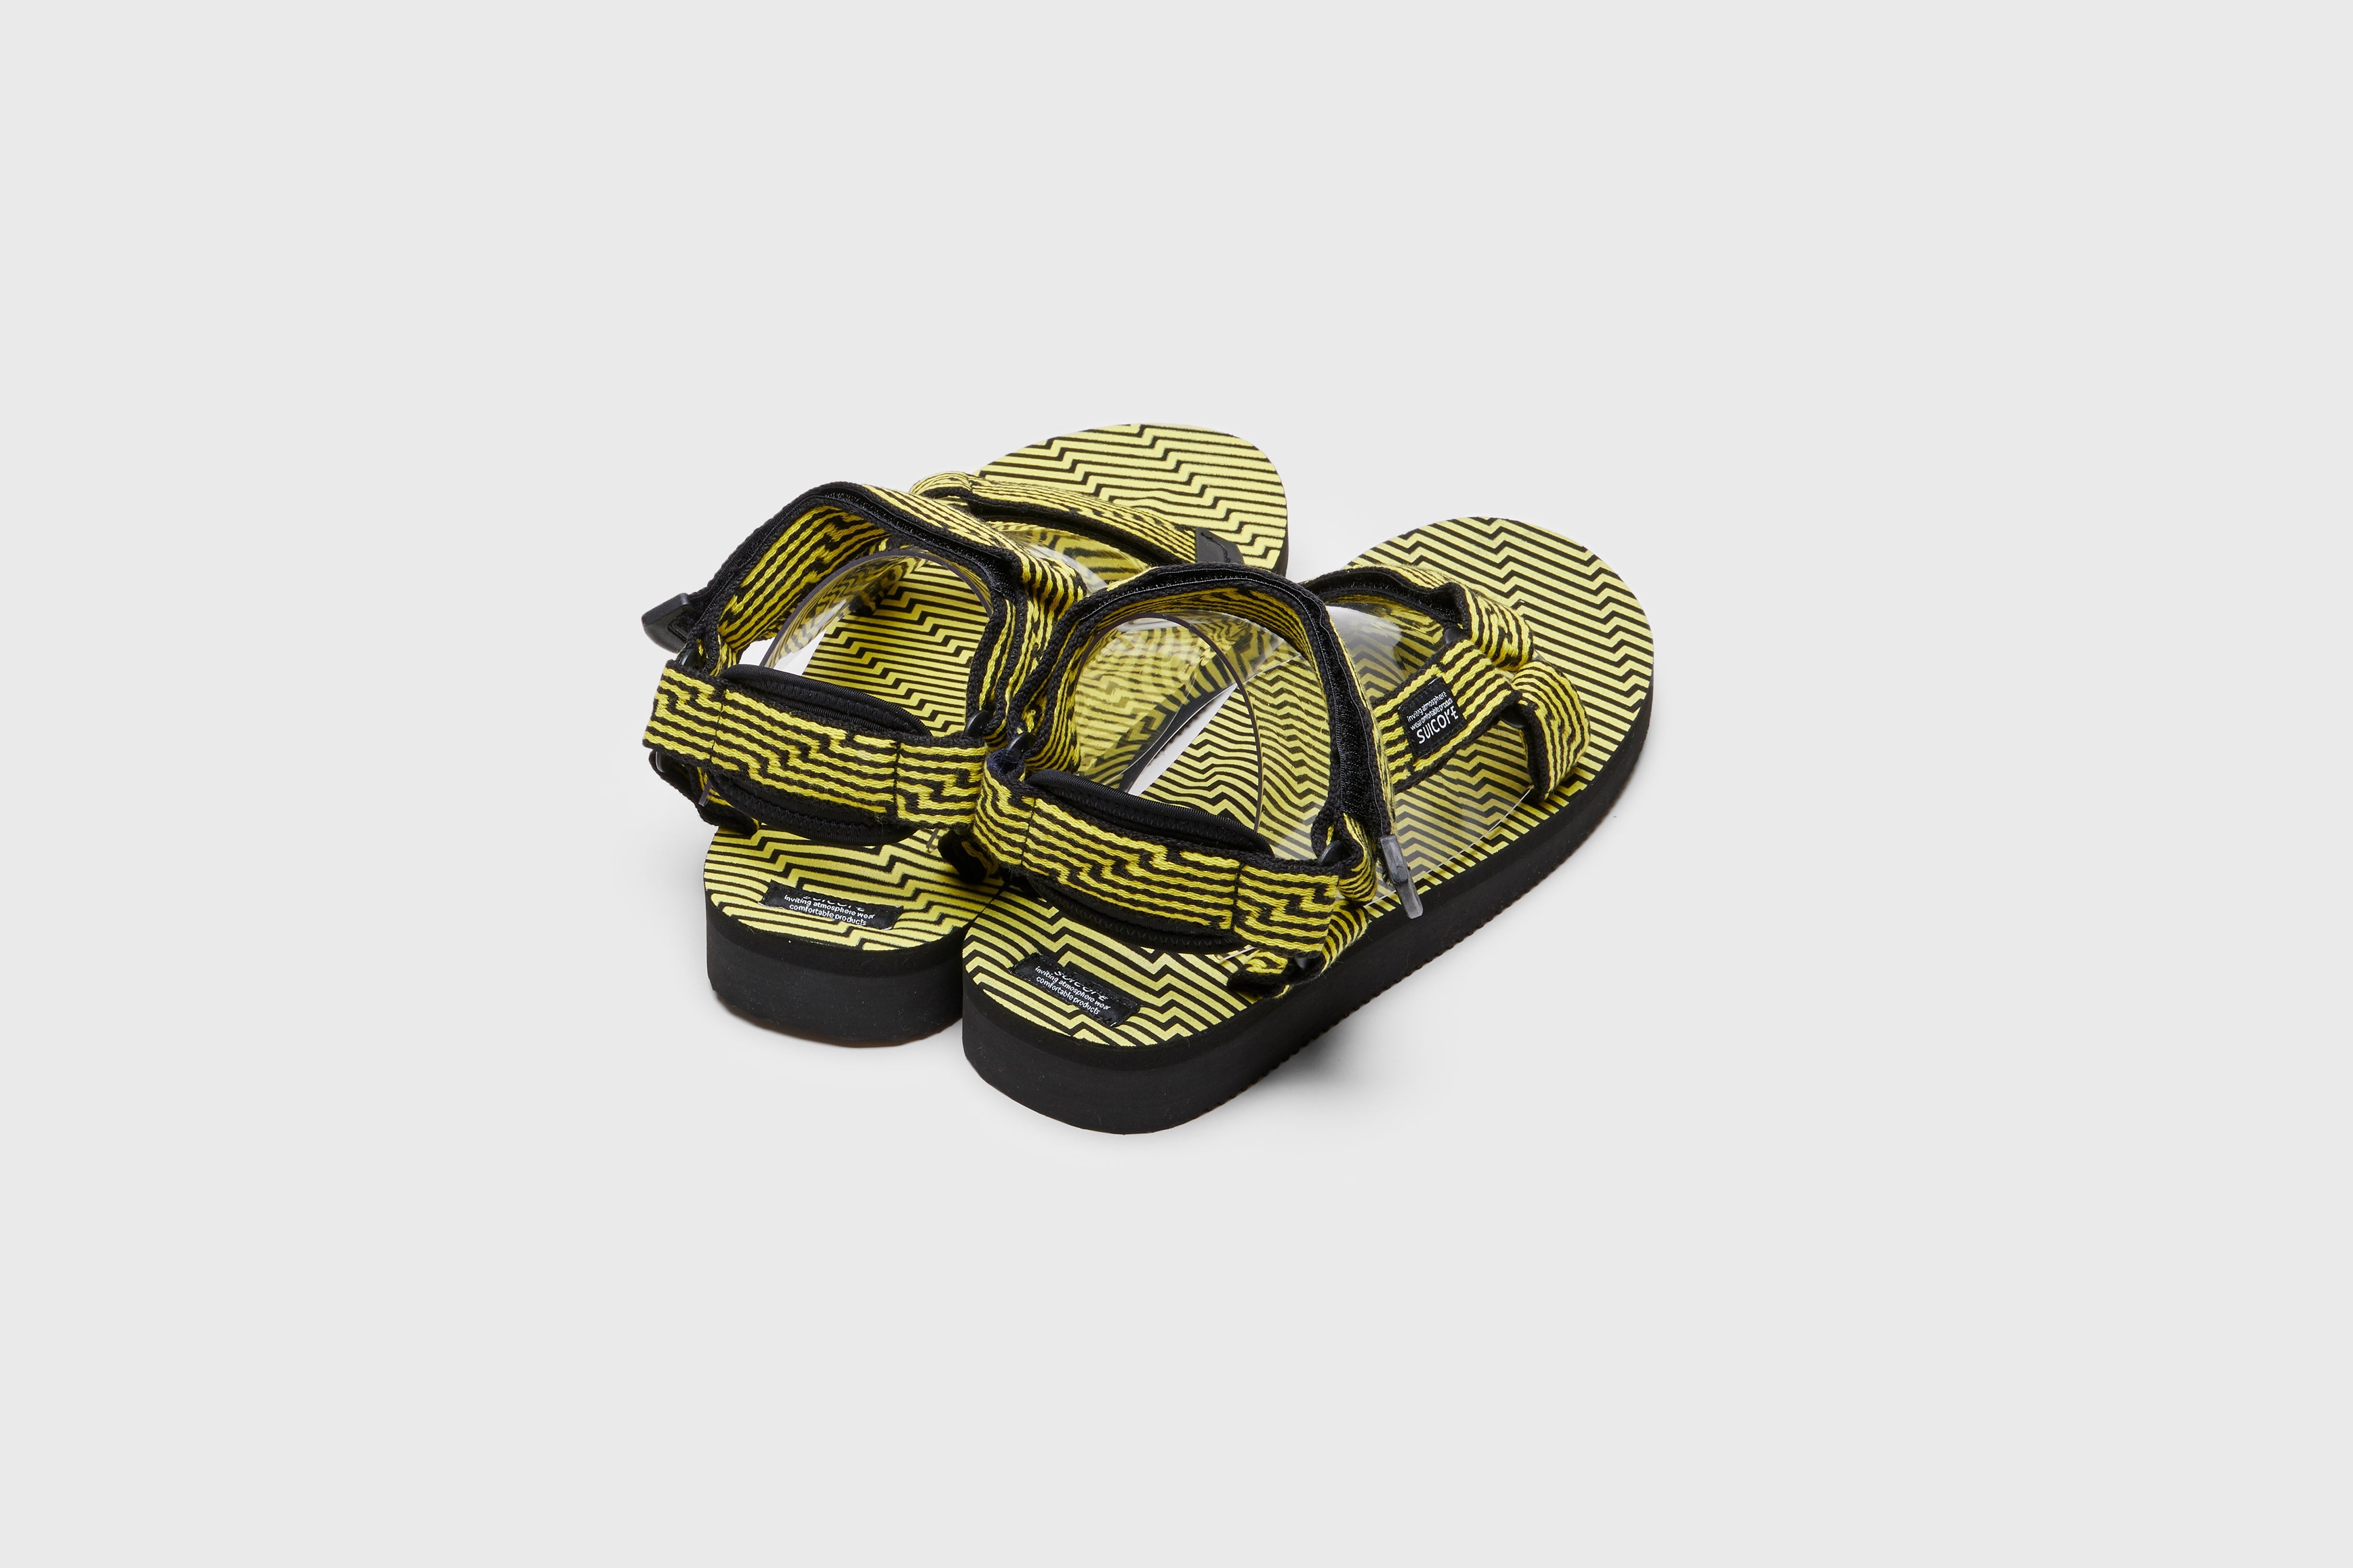 SUICOKE DEPA-JC01 sandals with black &amp; yellow nylon upper, black &amp; yellow midsole and sole, strap and logo patch. From Spring/Summer 2023 collection on eightywingold Web Store, an official partner of SUICOKE. OG-022-JC01 BLACK X YELLOW